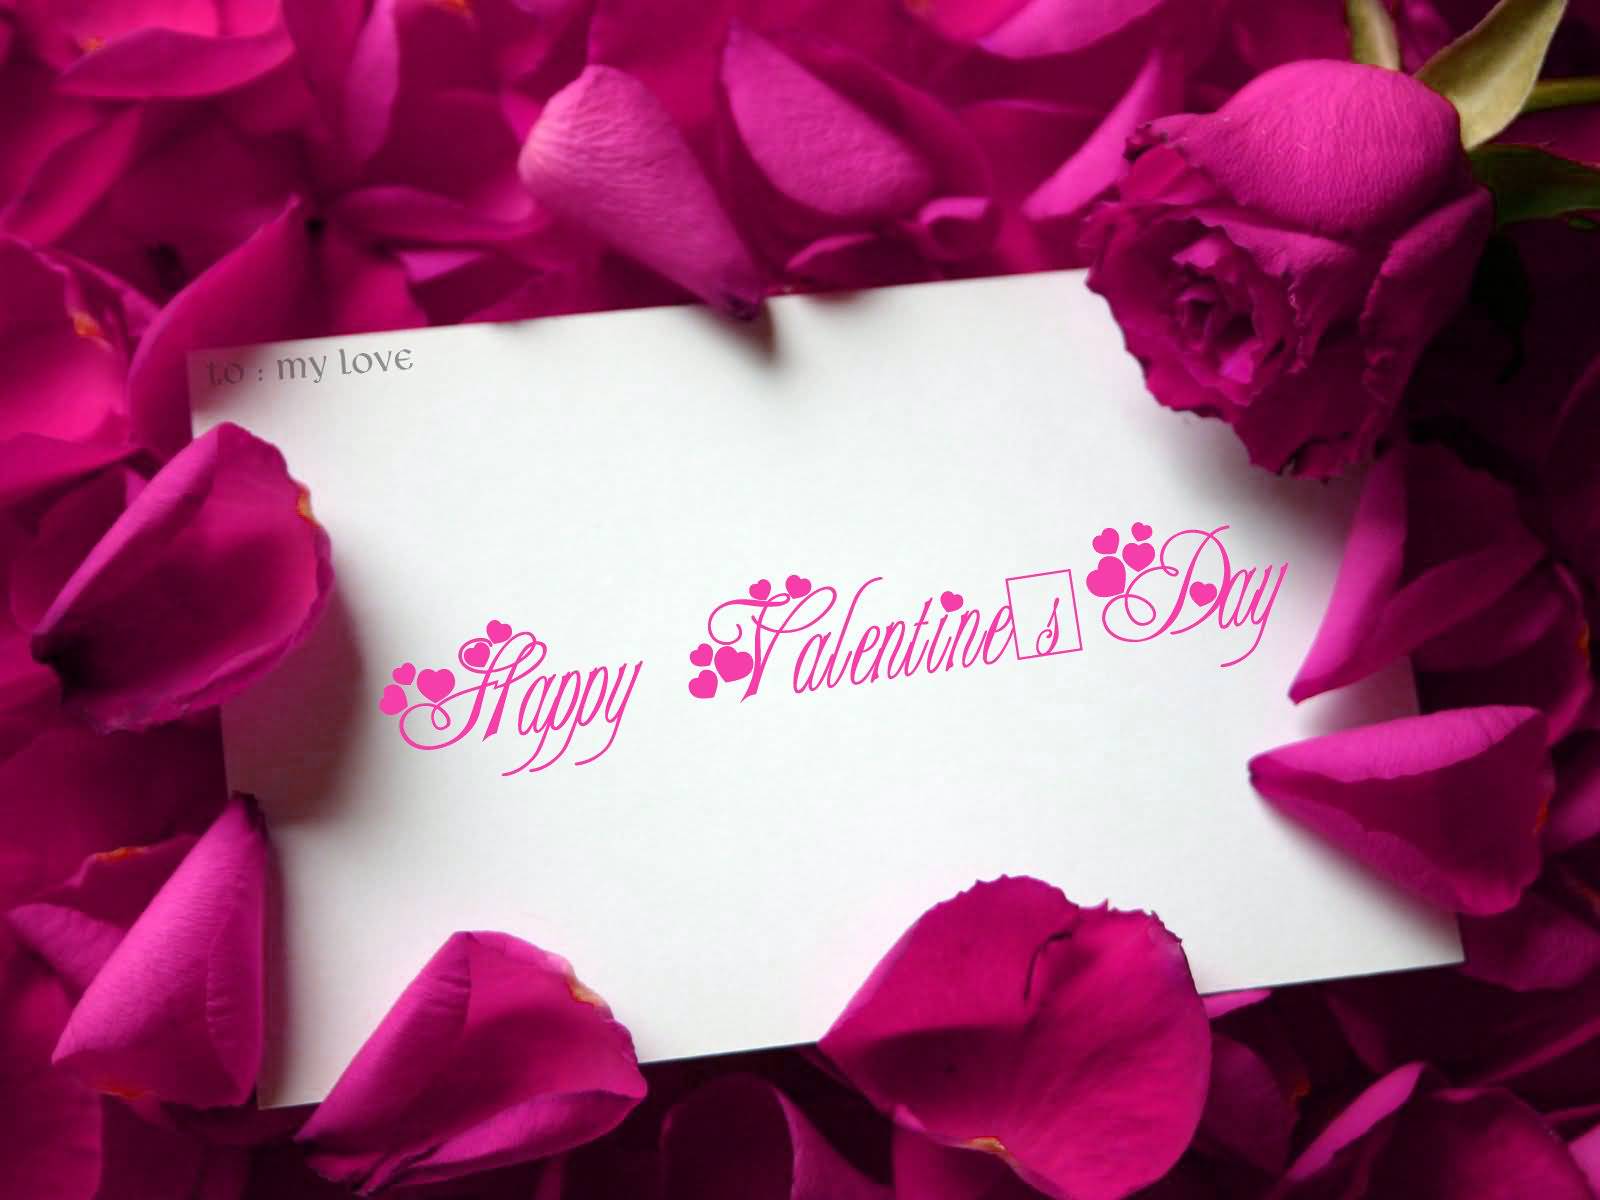 Happy Valentine's Day Note With Rose Flower Petals Wallpaper